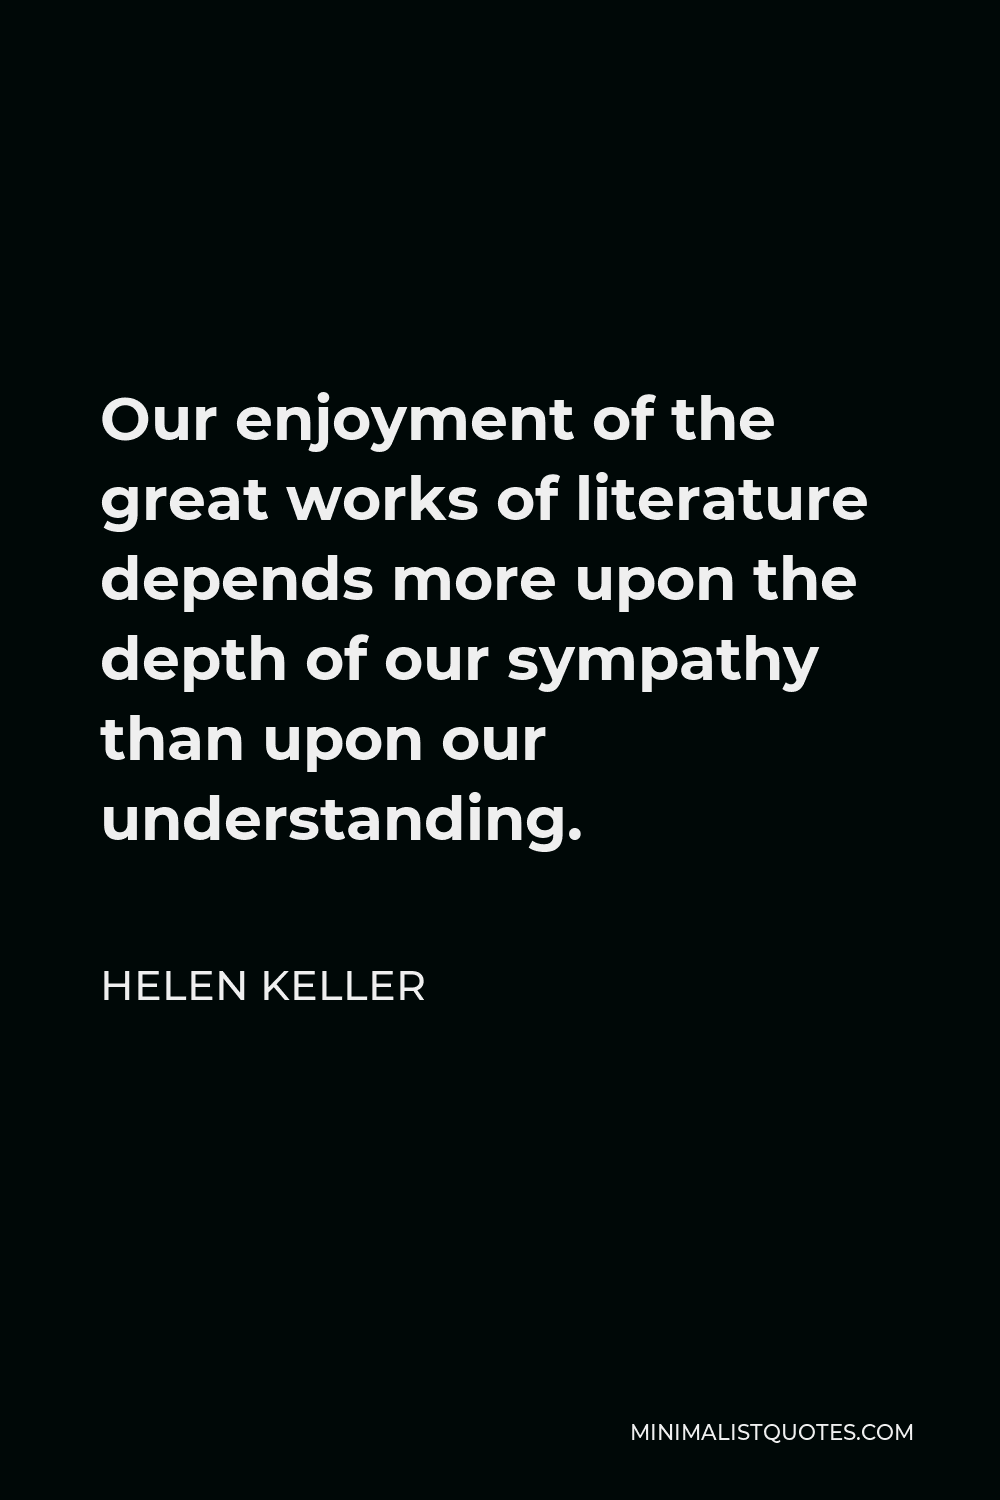 Helen Keller Quote - Our enjoyment of the great works of literature depends more upon the depth of our sympathy than upon our understanding.